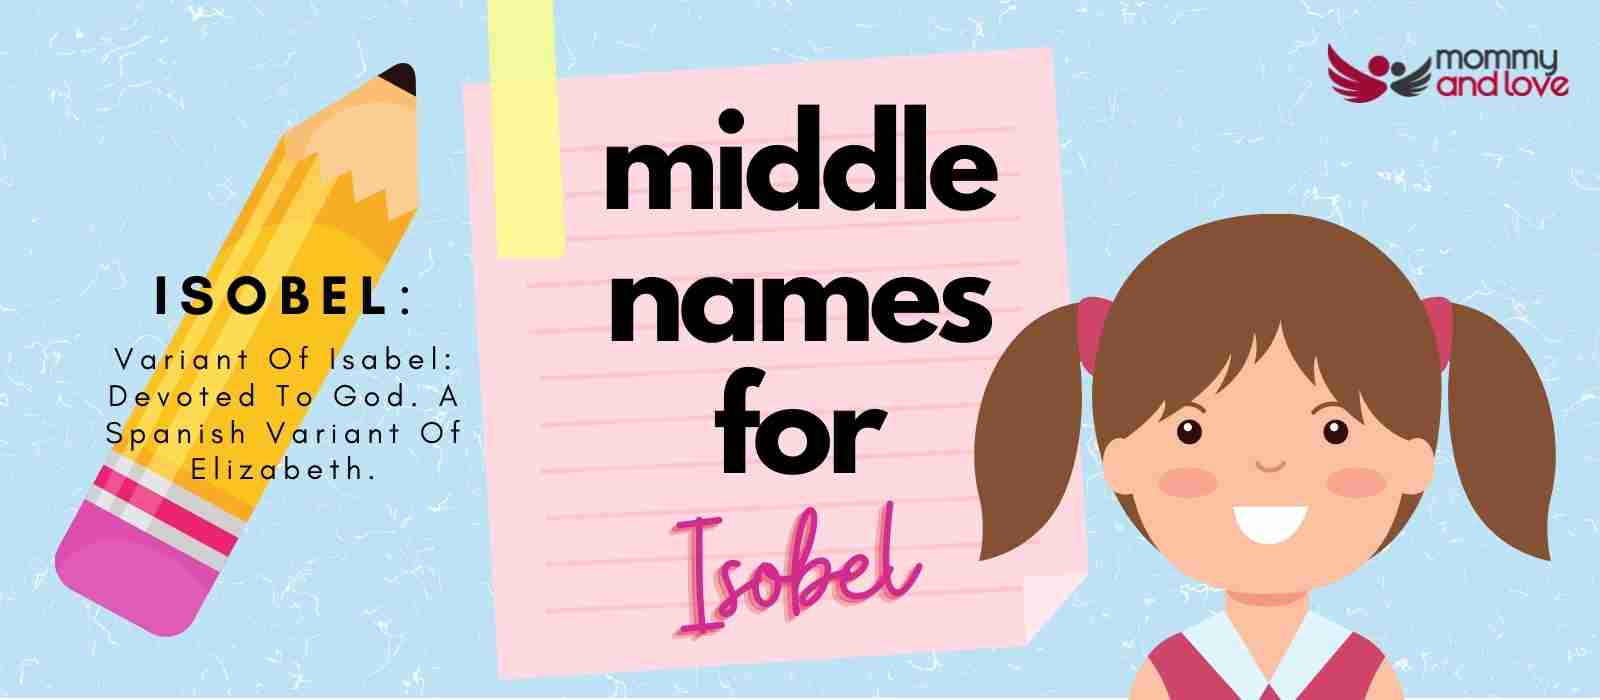 Middle Names for Isobel